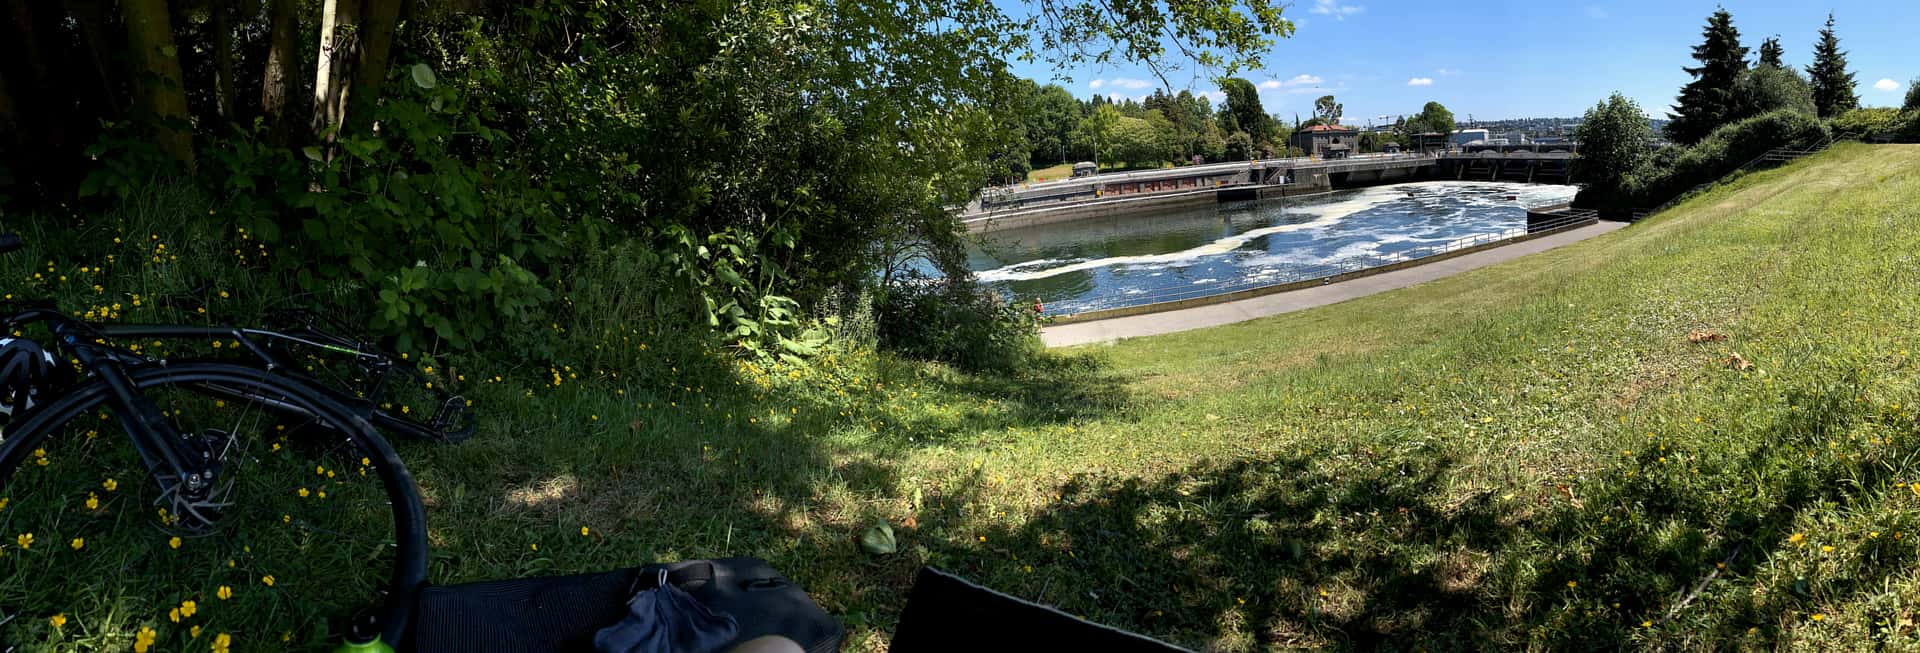 working remotely with a laptop and bicycle in the grass at Commodore Park, overlooking the Ballard locks